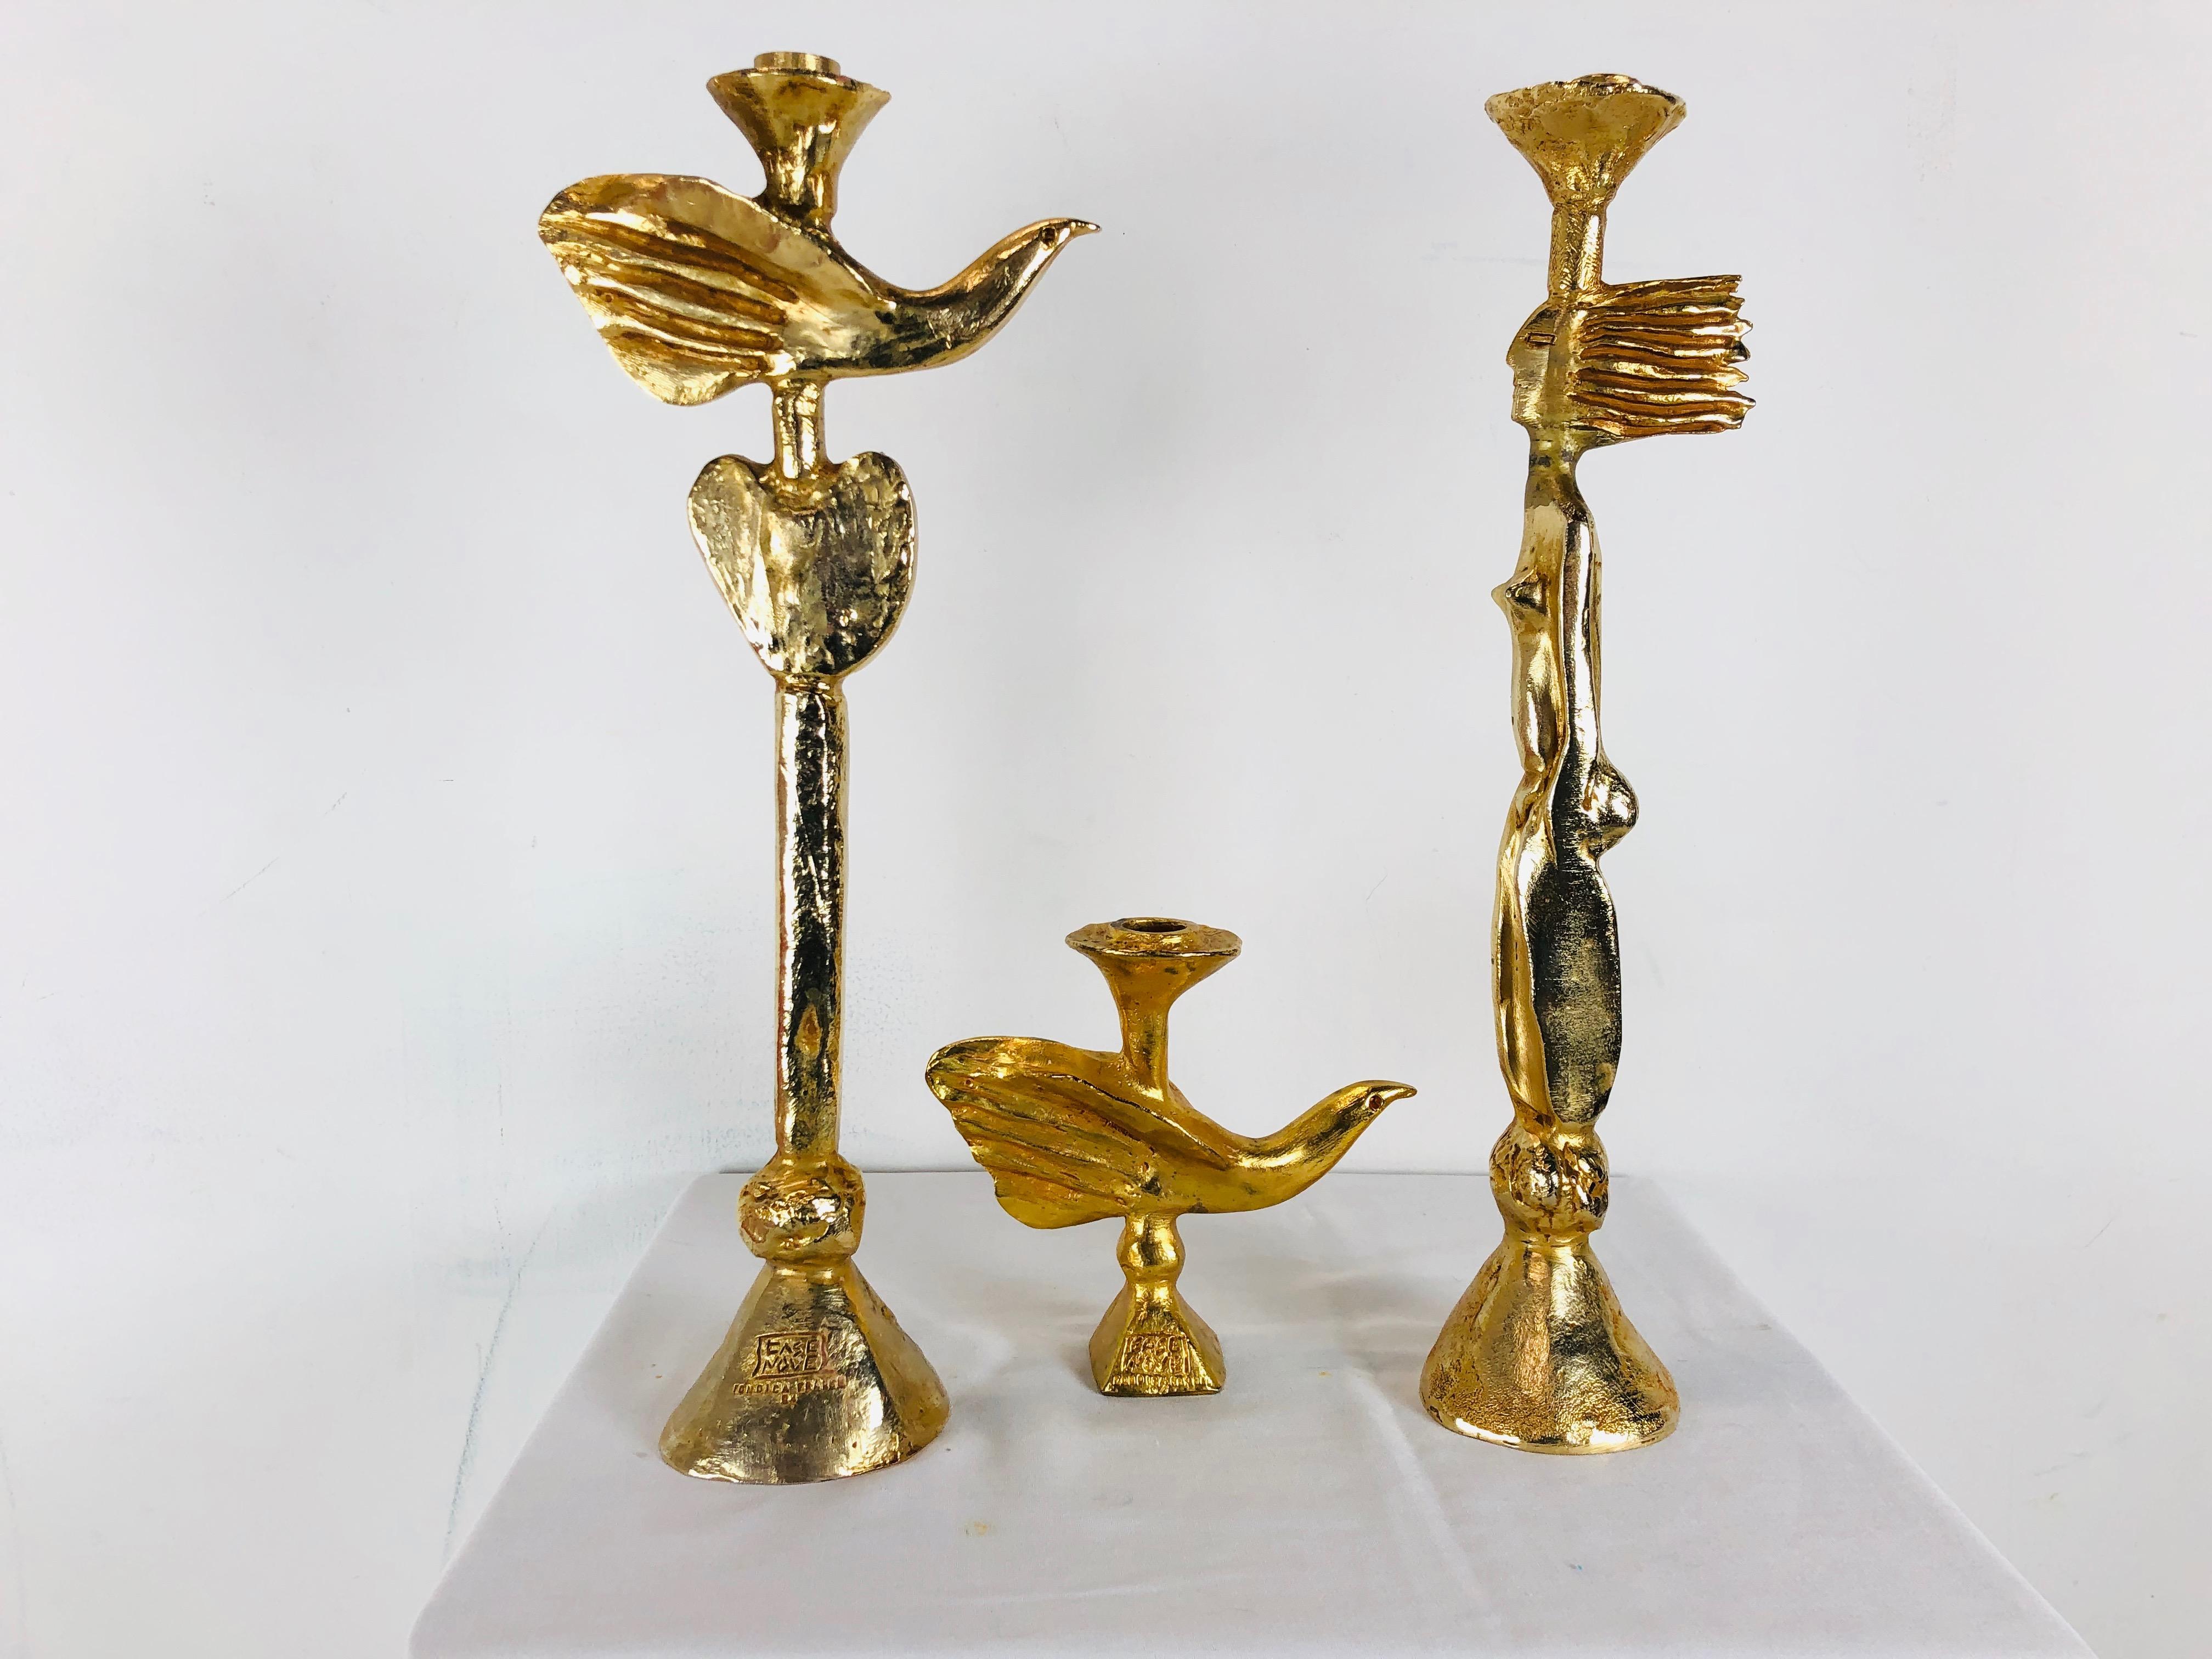 Set of three gilt bronze candlestick holders by Pierre Casenove for Fondica. These are heavy in weight and with a modern whimsical design.

Dimensions:
Large bird - 8 W x 4.5 D x 18.5 T
Small bird - 7.5 W x 2 D x 7 T
Woman - 4 W x 3.5 D x 18.5